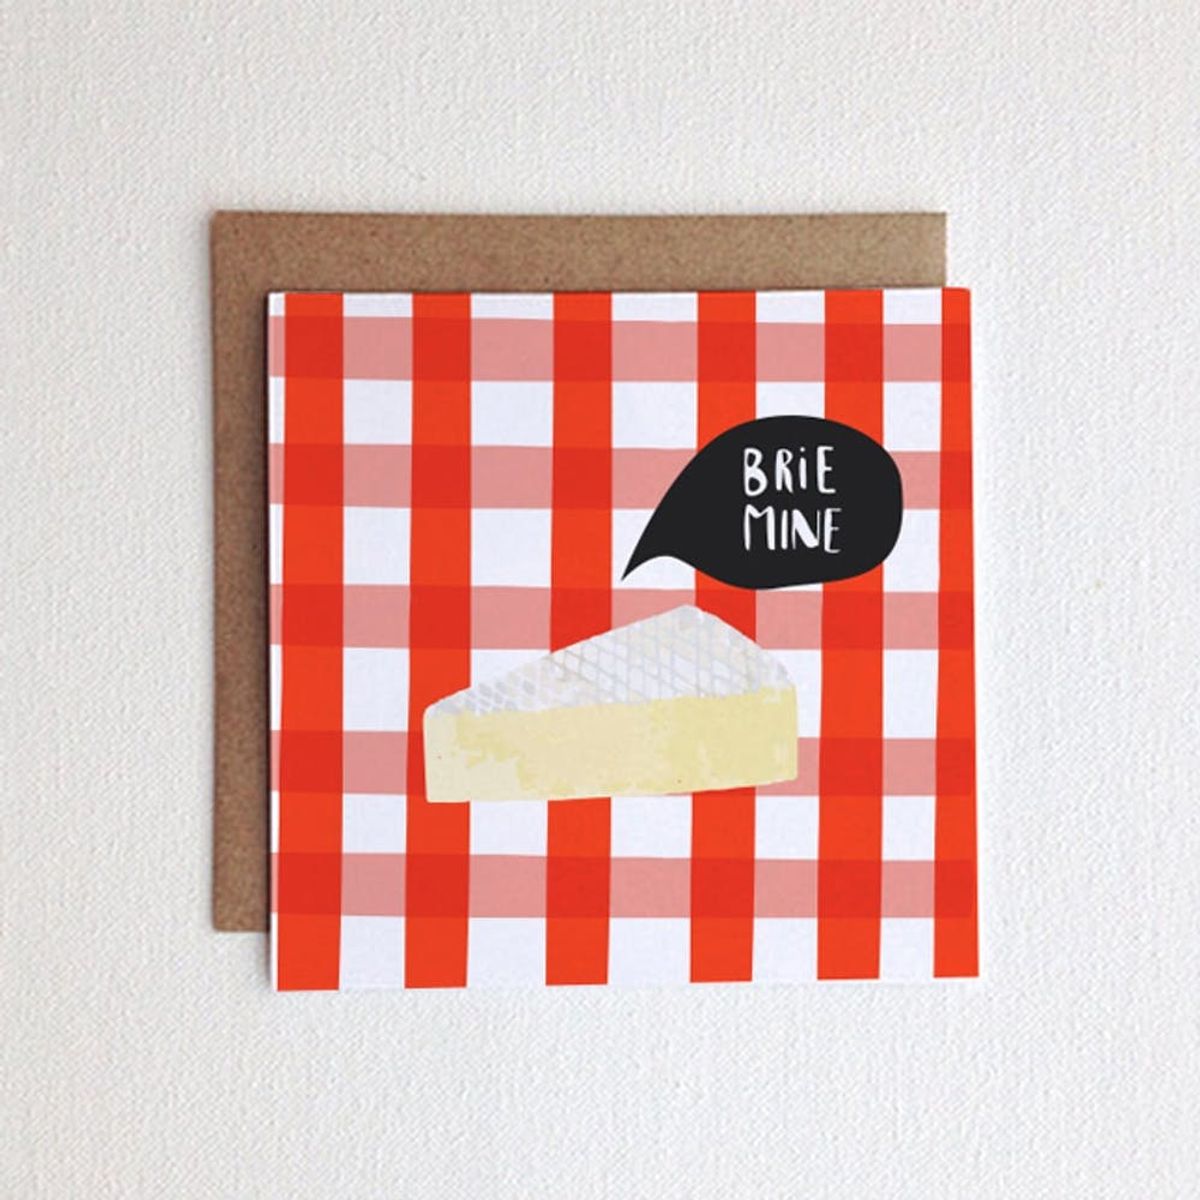 Will You Brie Mine? 10 Hilarious Cards for Your Valentine